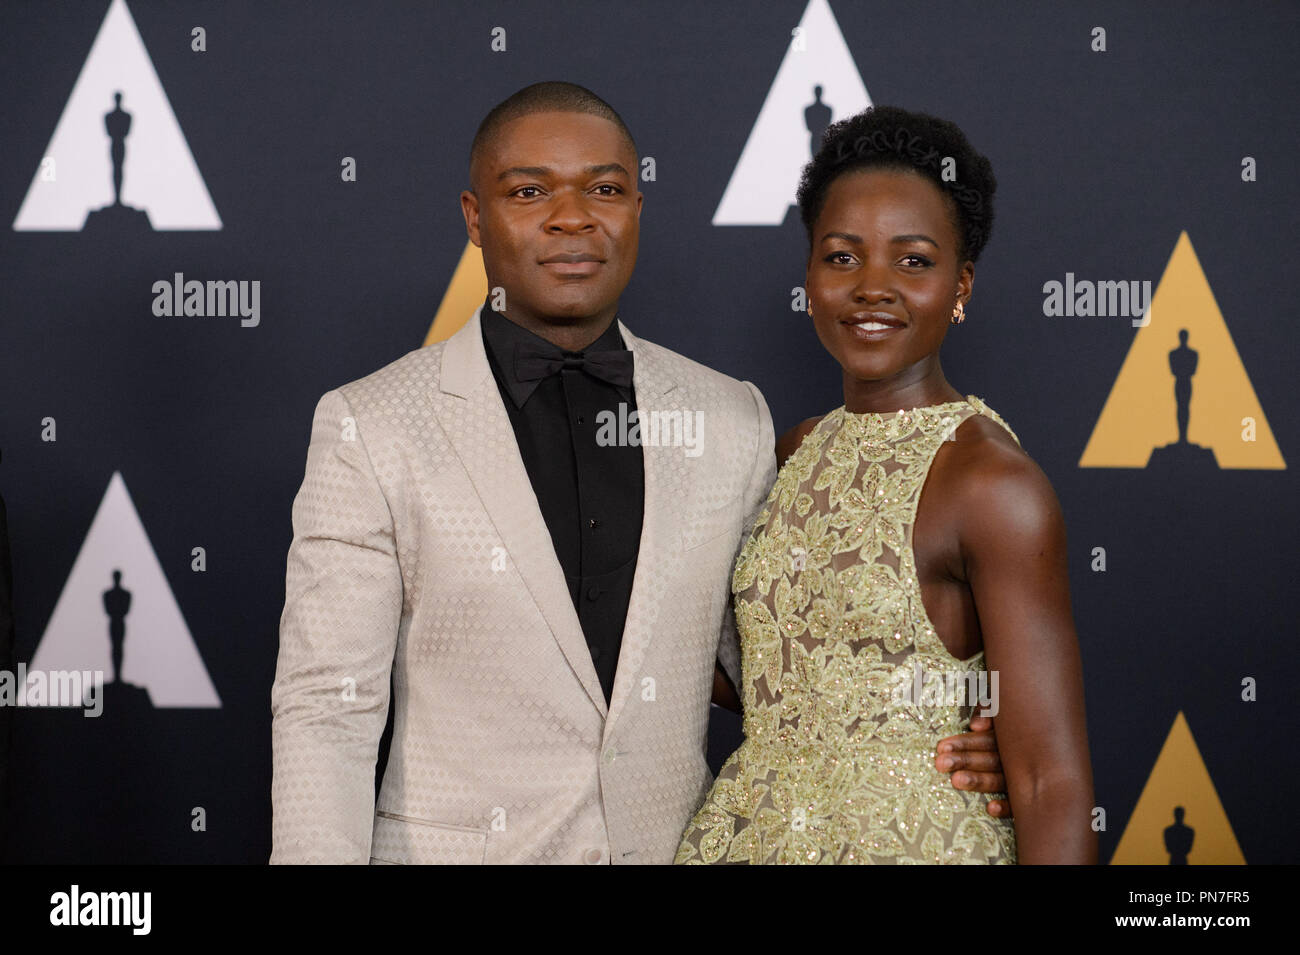 David Oyelowo (left) and Lupita Nyong'o attend the Academy’s 8th Annual Governors Awards in The Ray Dolby Ballroom at Hollywood & Highland Center® in Hollywood, CA, on Saturday, November 12, 2016.  File Reference # 33153 079THA  For Editorial Use Only -  All Rights Reserved Stock Photo